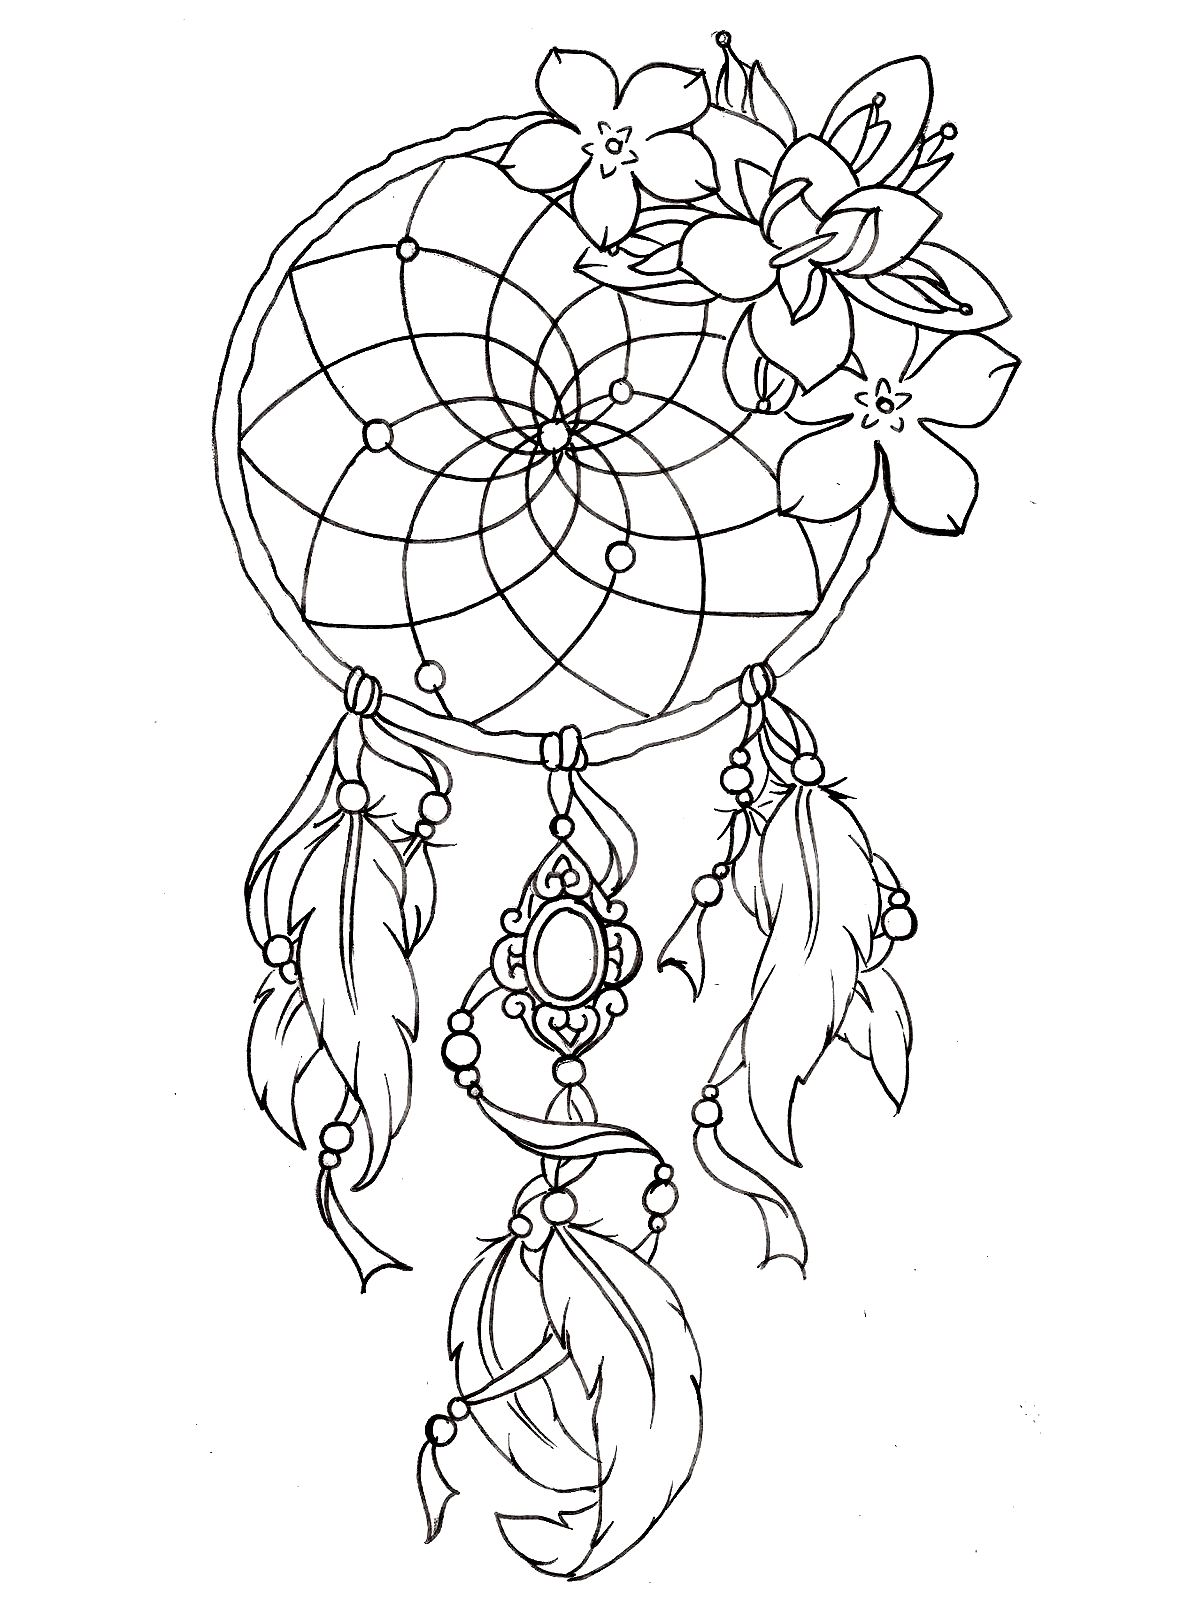 Dreamcatcher tattoo designs - Tattoos Adult Coloring Pages